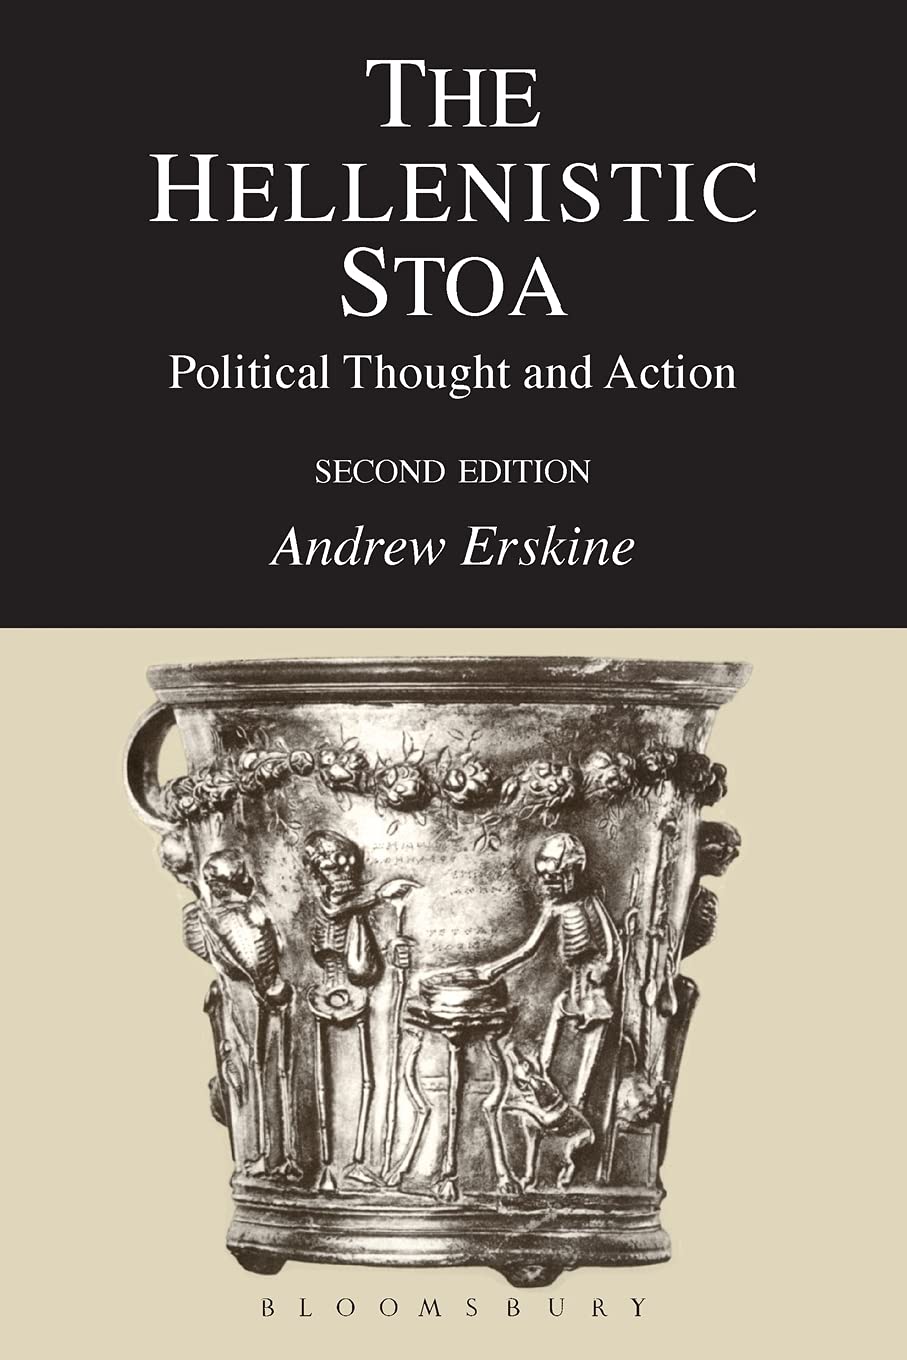 The Hellenistic Stoa: Political Thought and Action